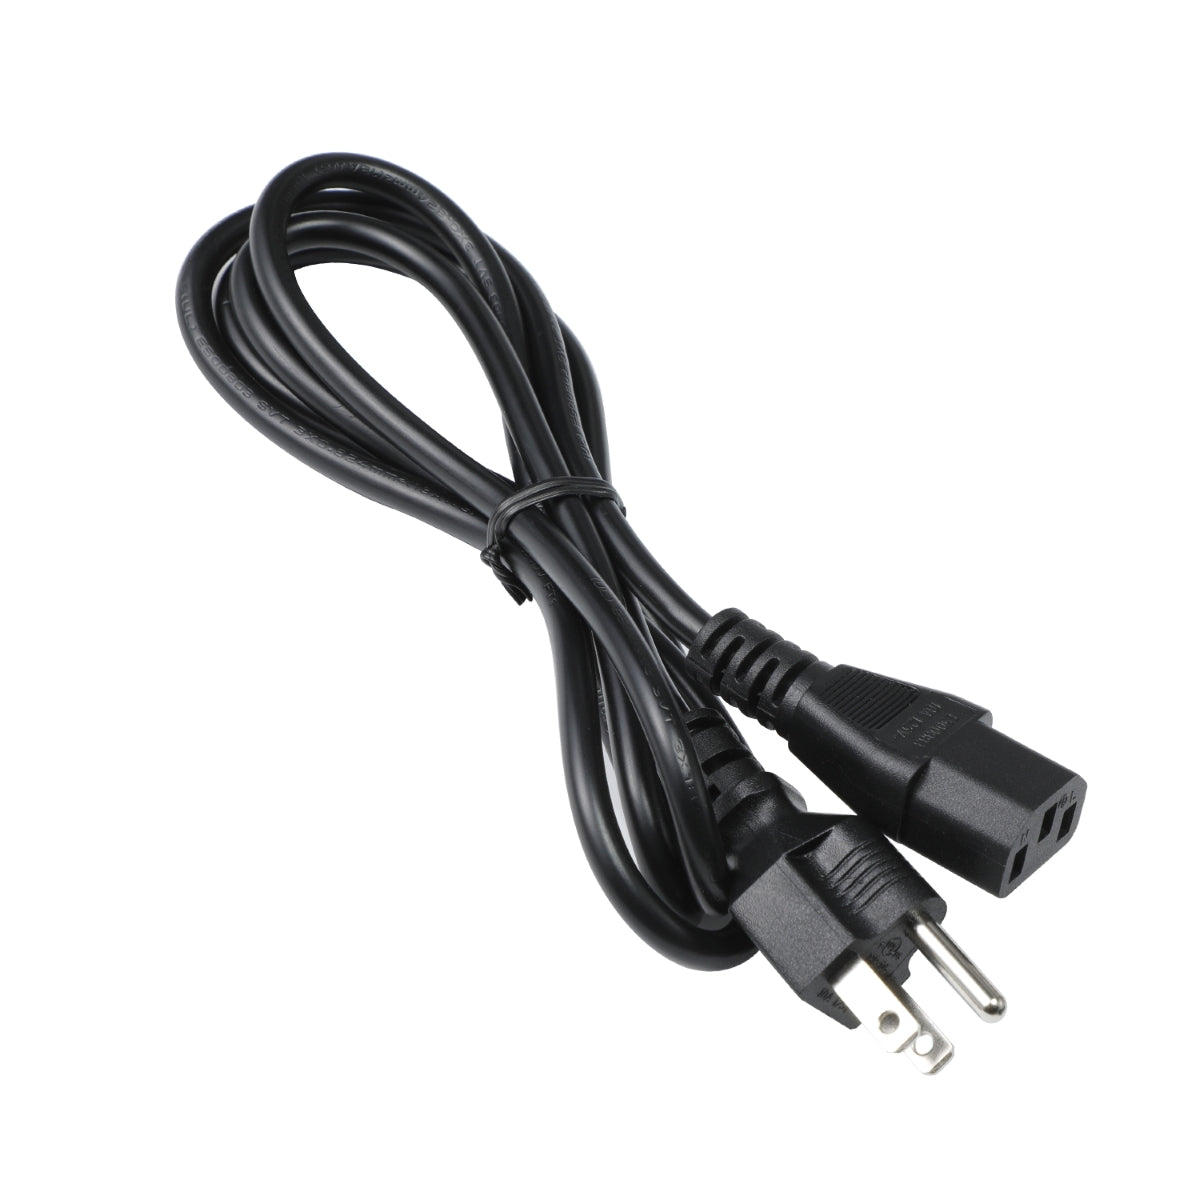 Power Cord for HP Pavilion 550-050 Computer.